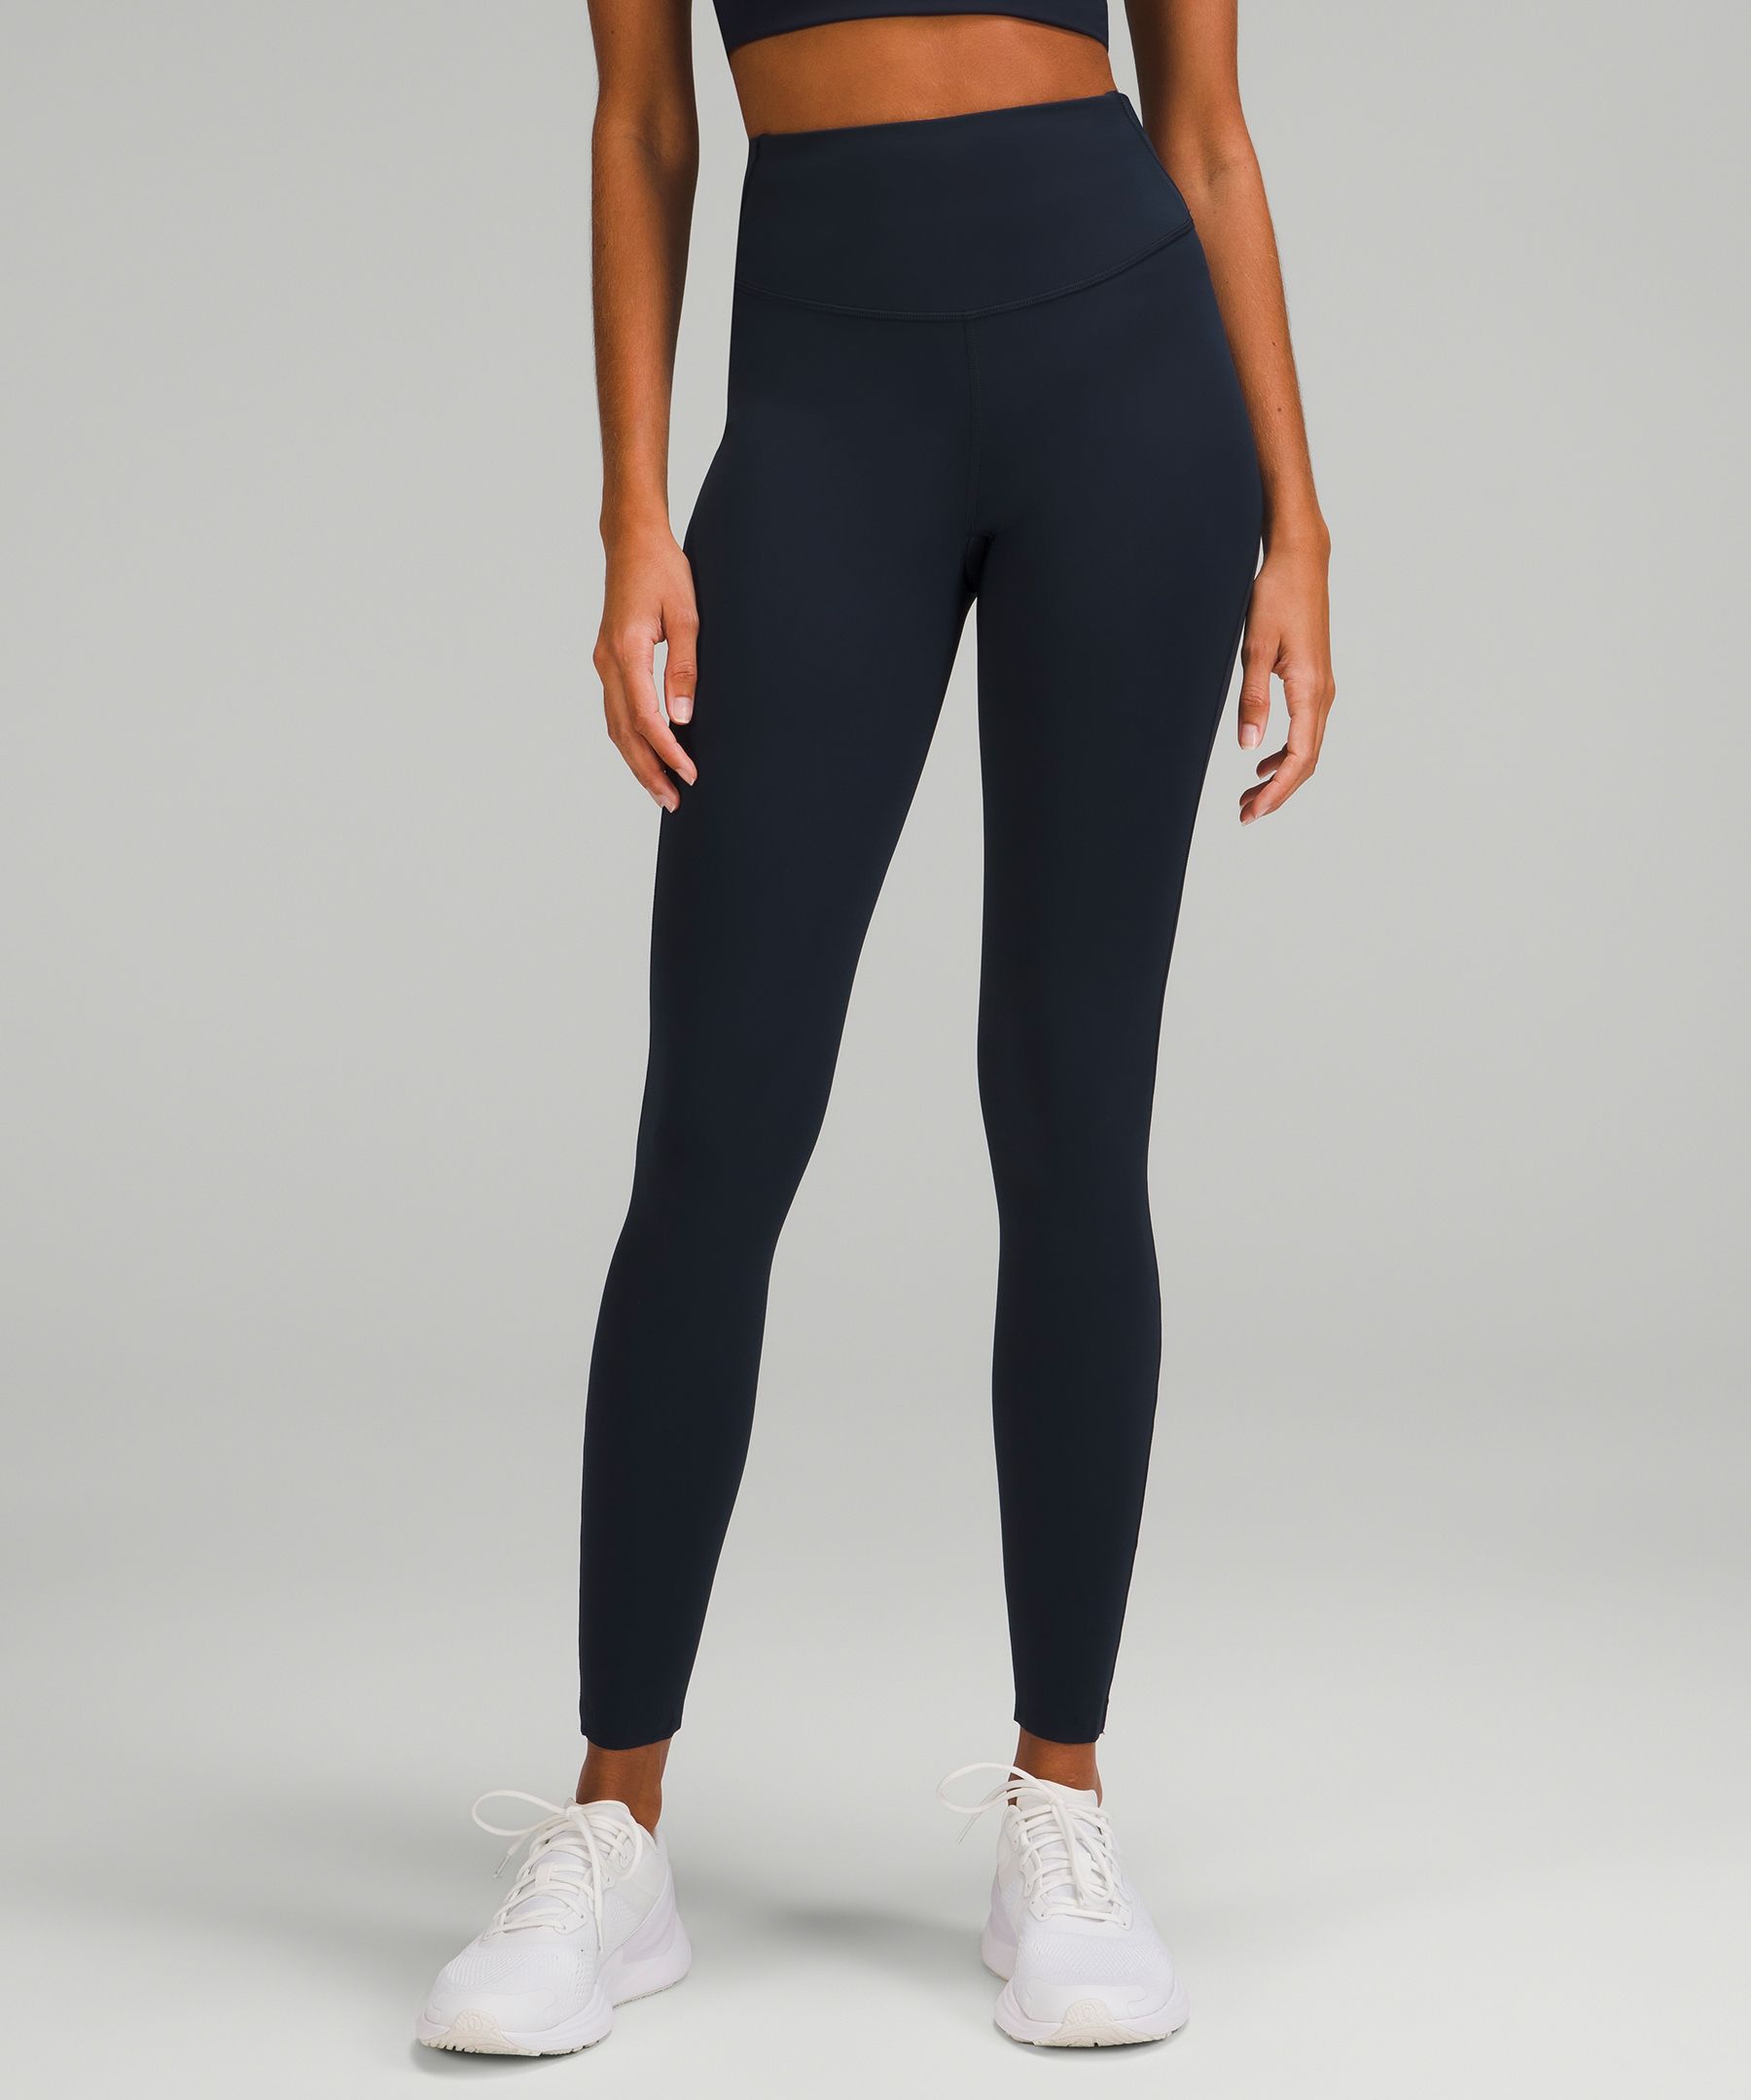 Lululemon athletica Base Pace High-Rise Tight 28, Women's Leggings/Tights